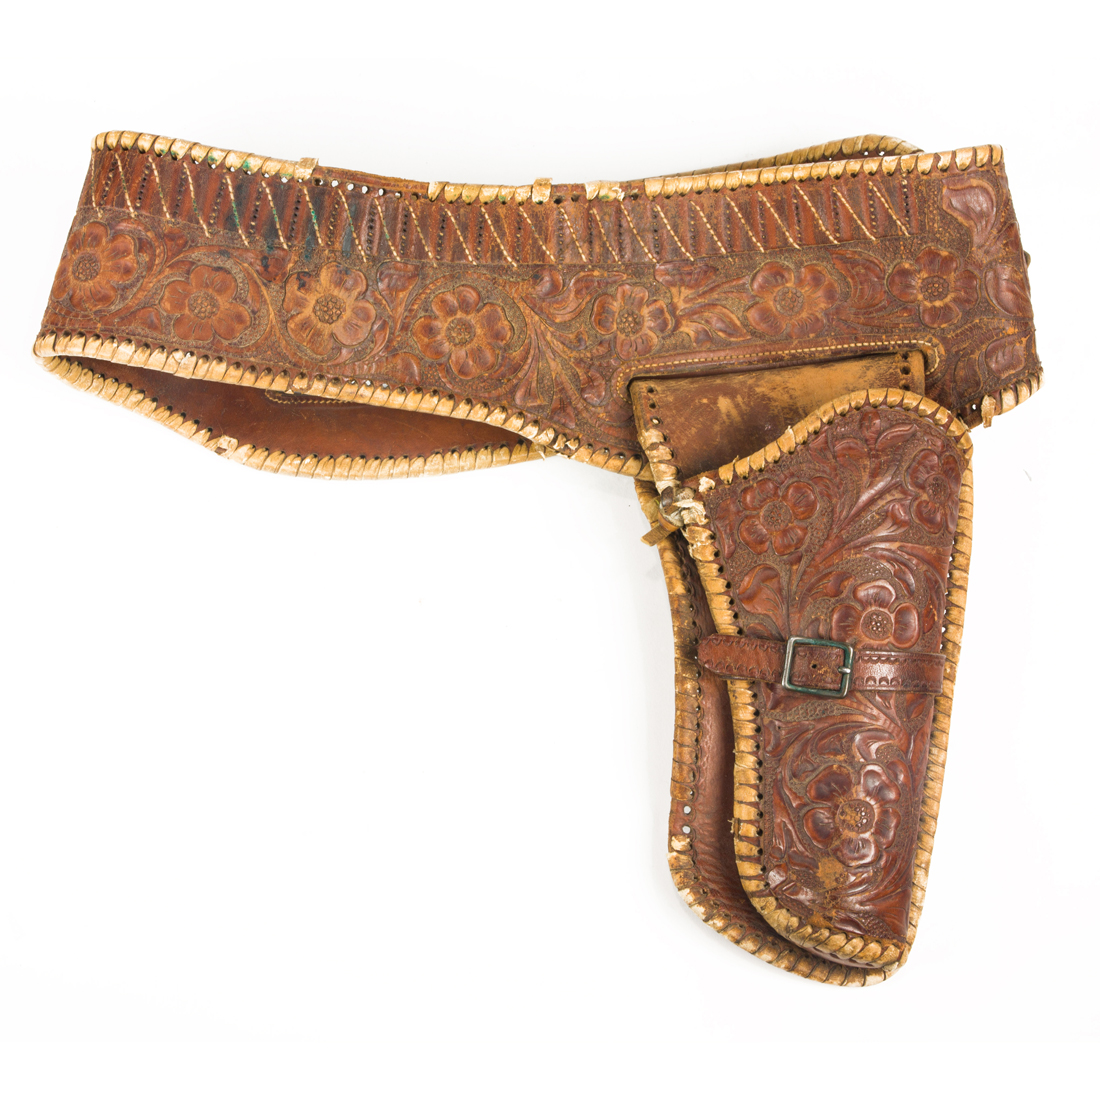 A MEXICAN TOOLED LEATHER HOLSTER